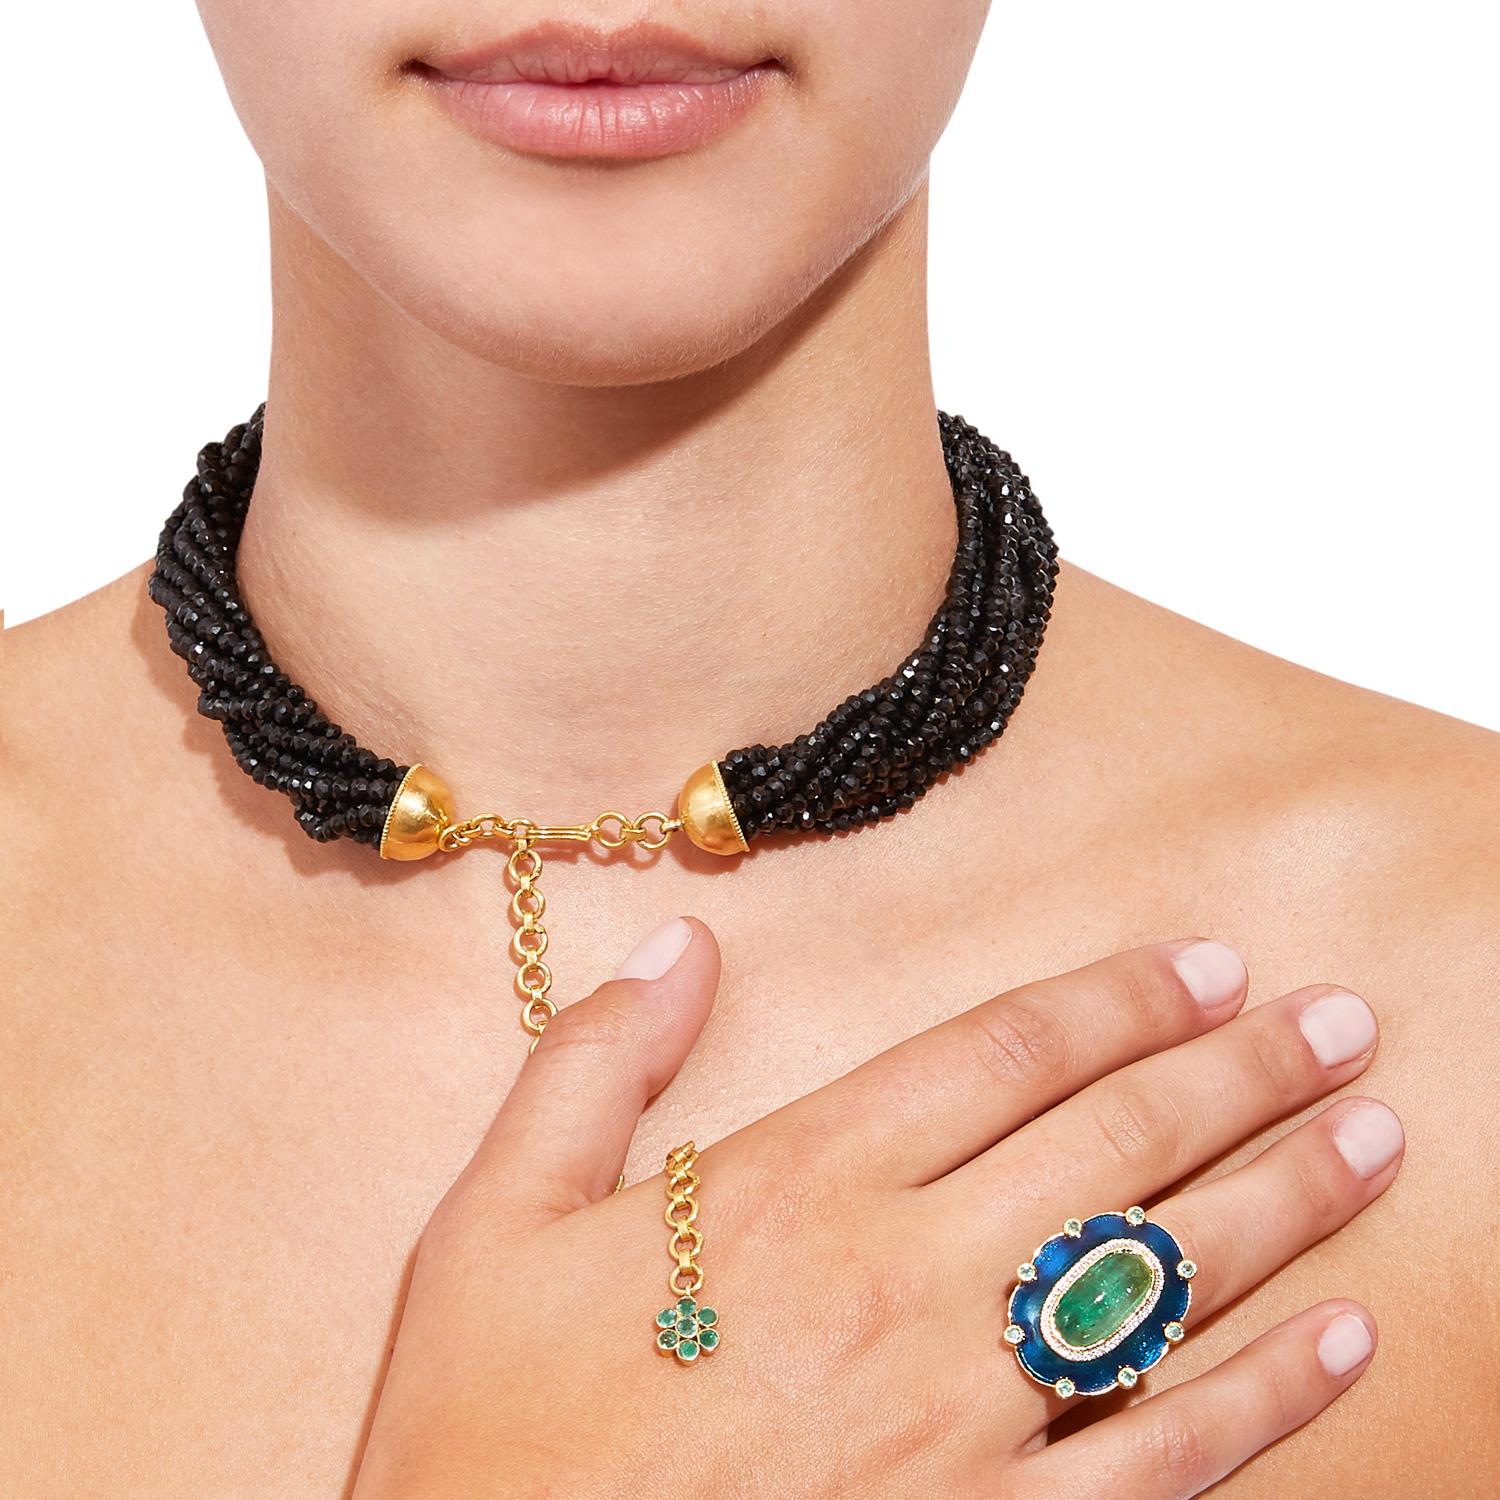 The drama and fire of natural black tourmalines is perfectly showcased in this tourmaline and emerald necklace featuring multiple strands of black tourmalines with an 18 karat gold chain closure and 4 inch long extender chain suspending an emerald